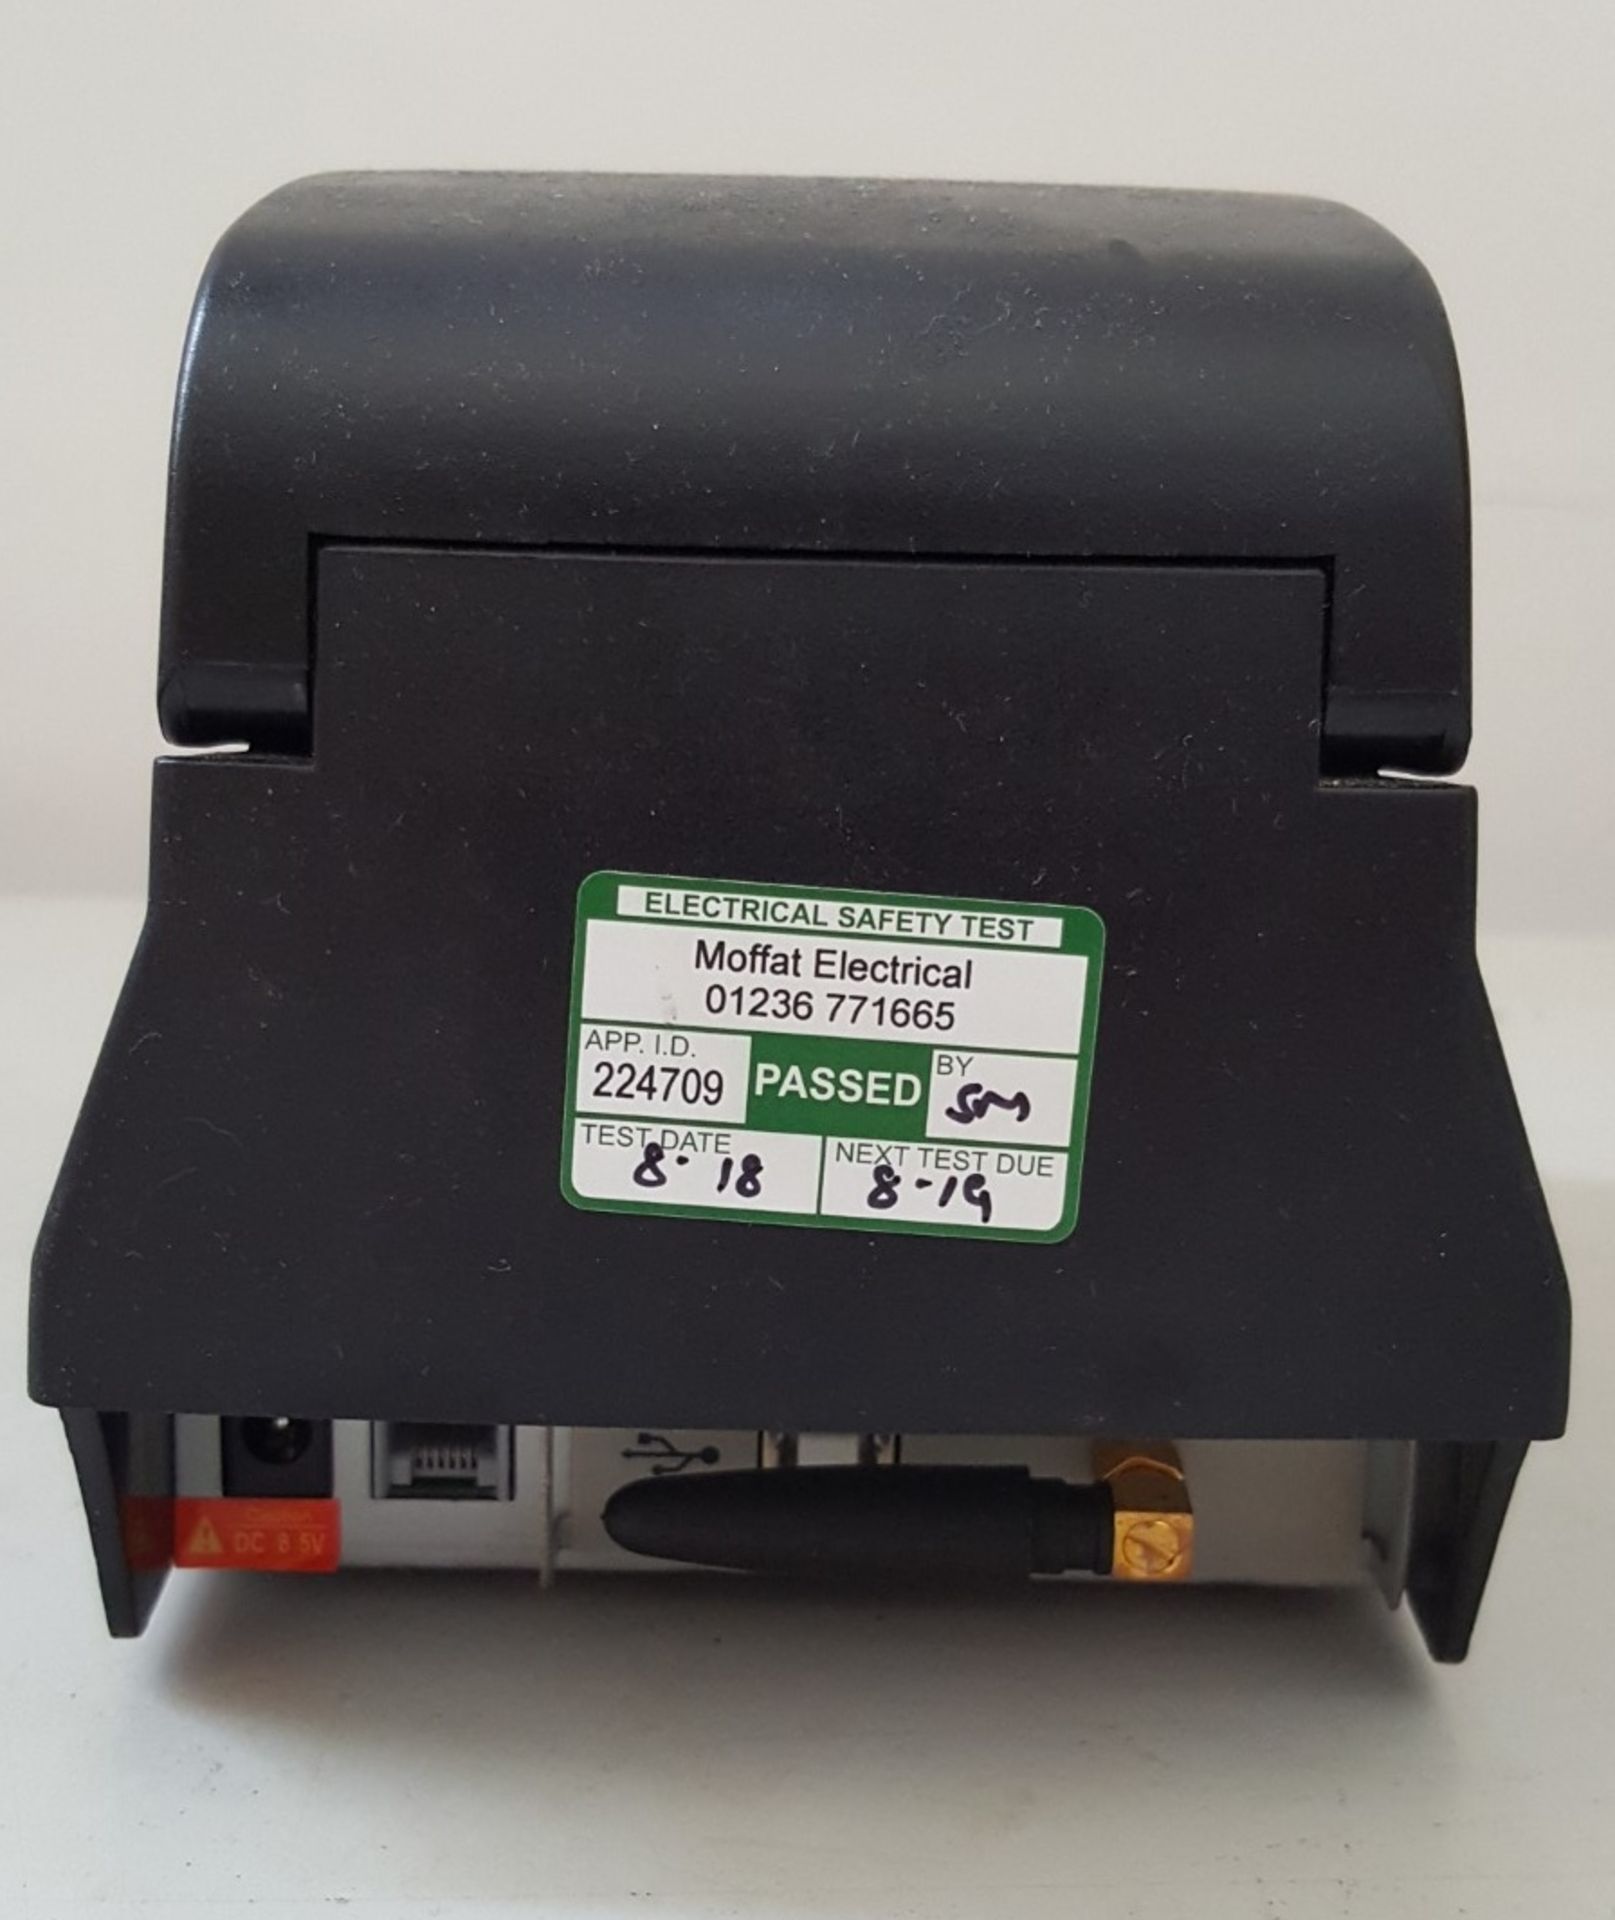 1 x Jolimark TP510 Thermal Printer With Bluetooth & USB interface - Ref BY208 - Image 4 of 4